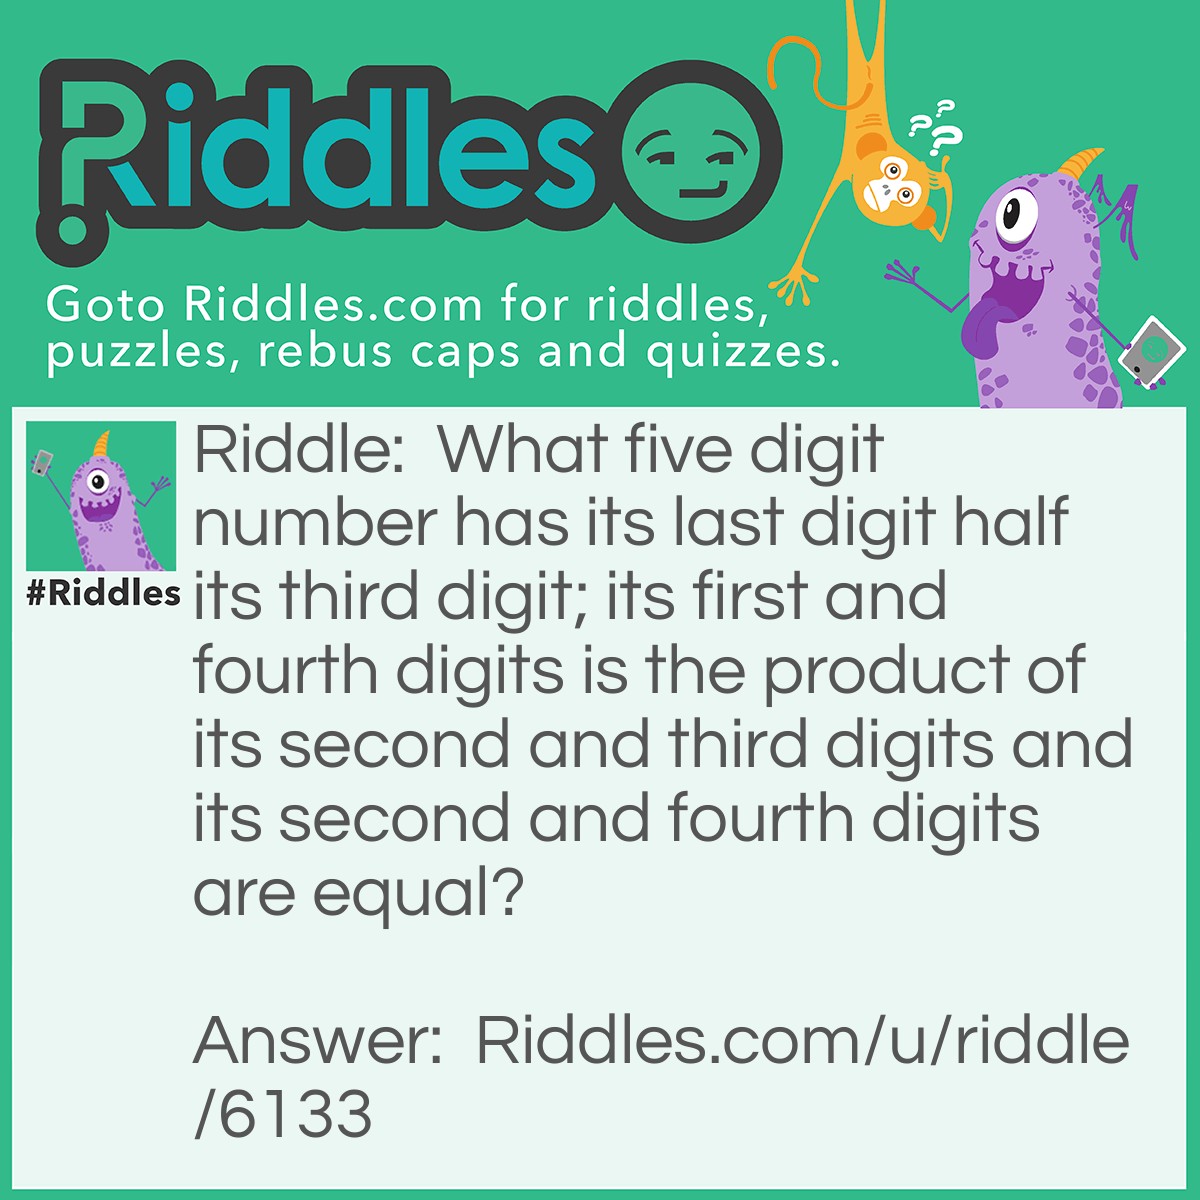 Riddle: What five digit number has its last digit half its third digit; its first and fourth digits is the product of its second and third digits and its second and fourth digits are equal? Answer: The number is 12623.